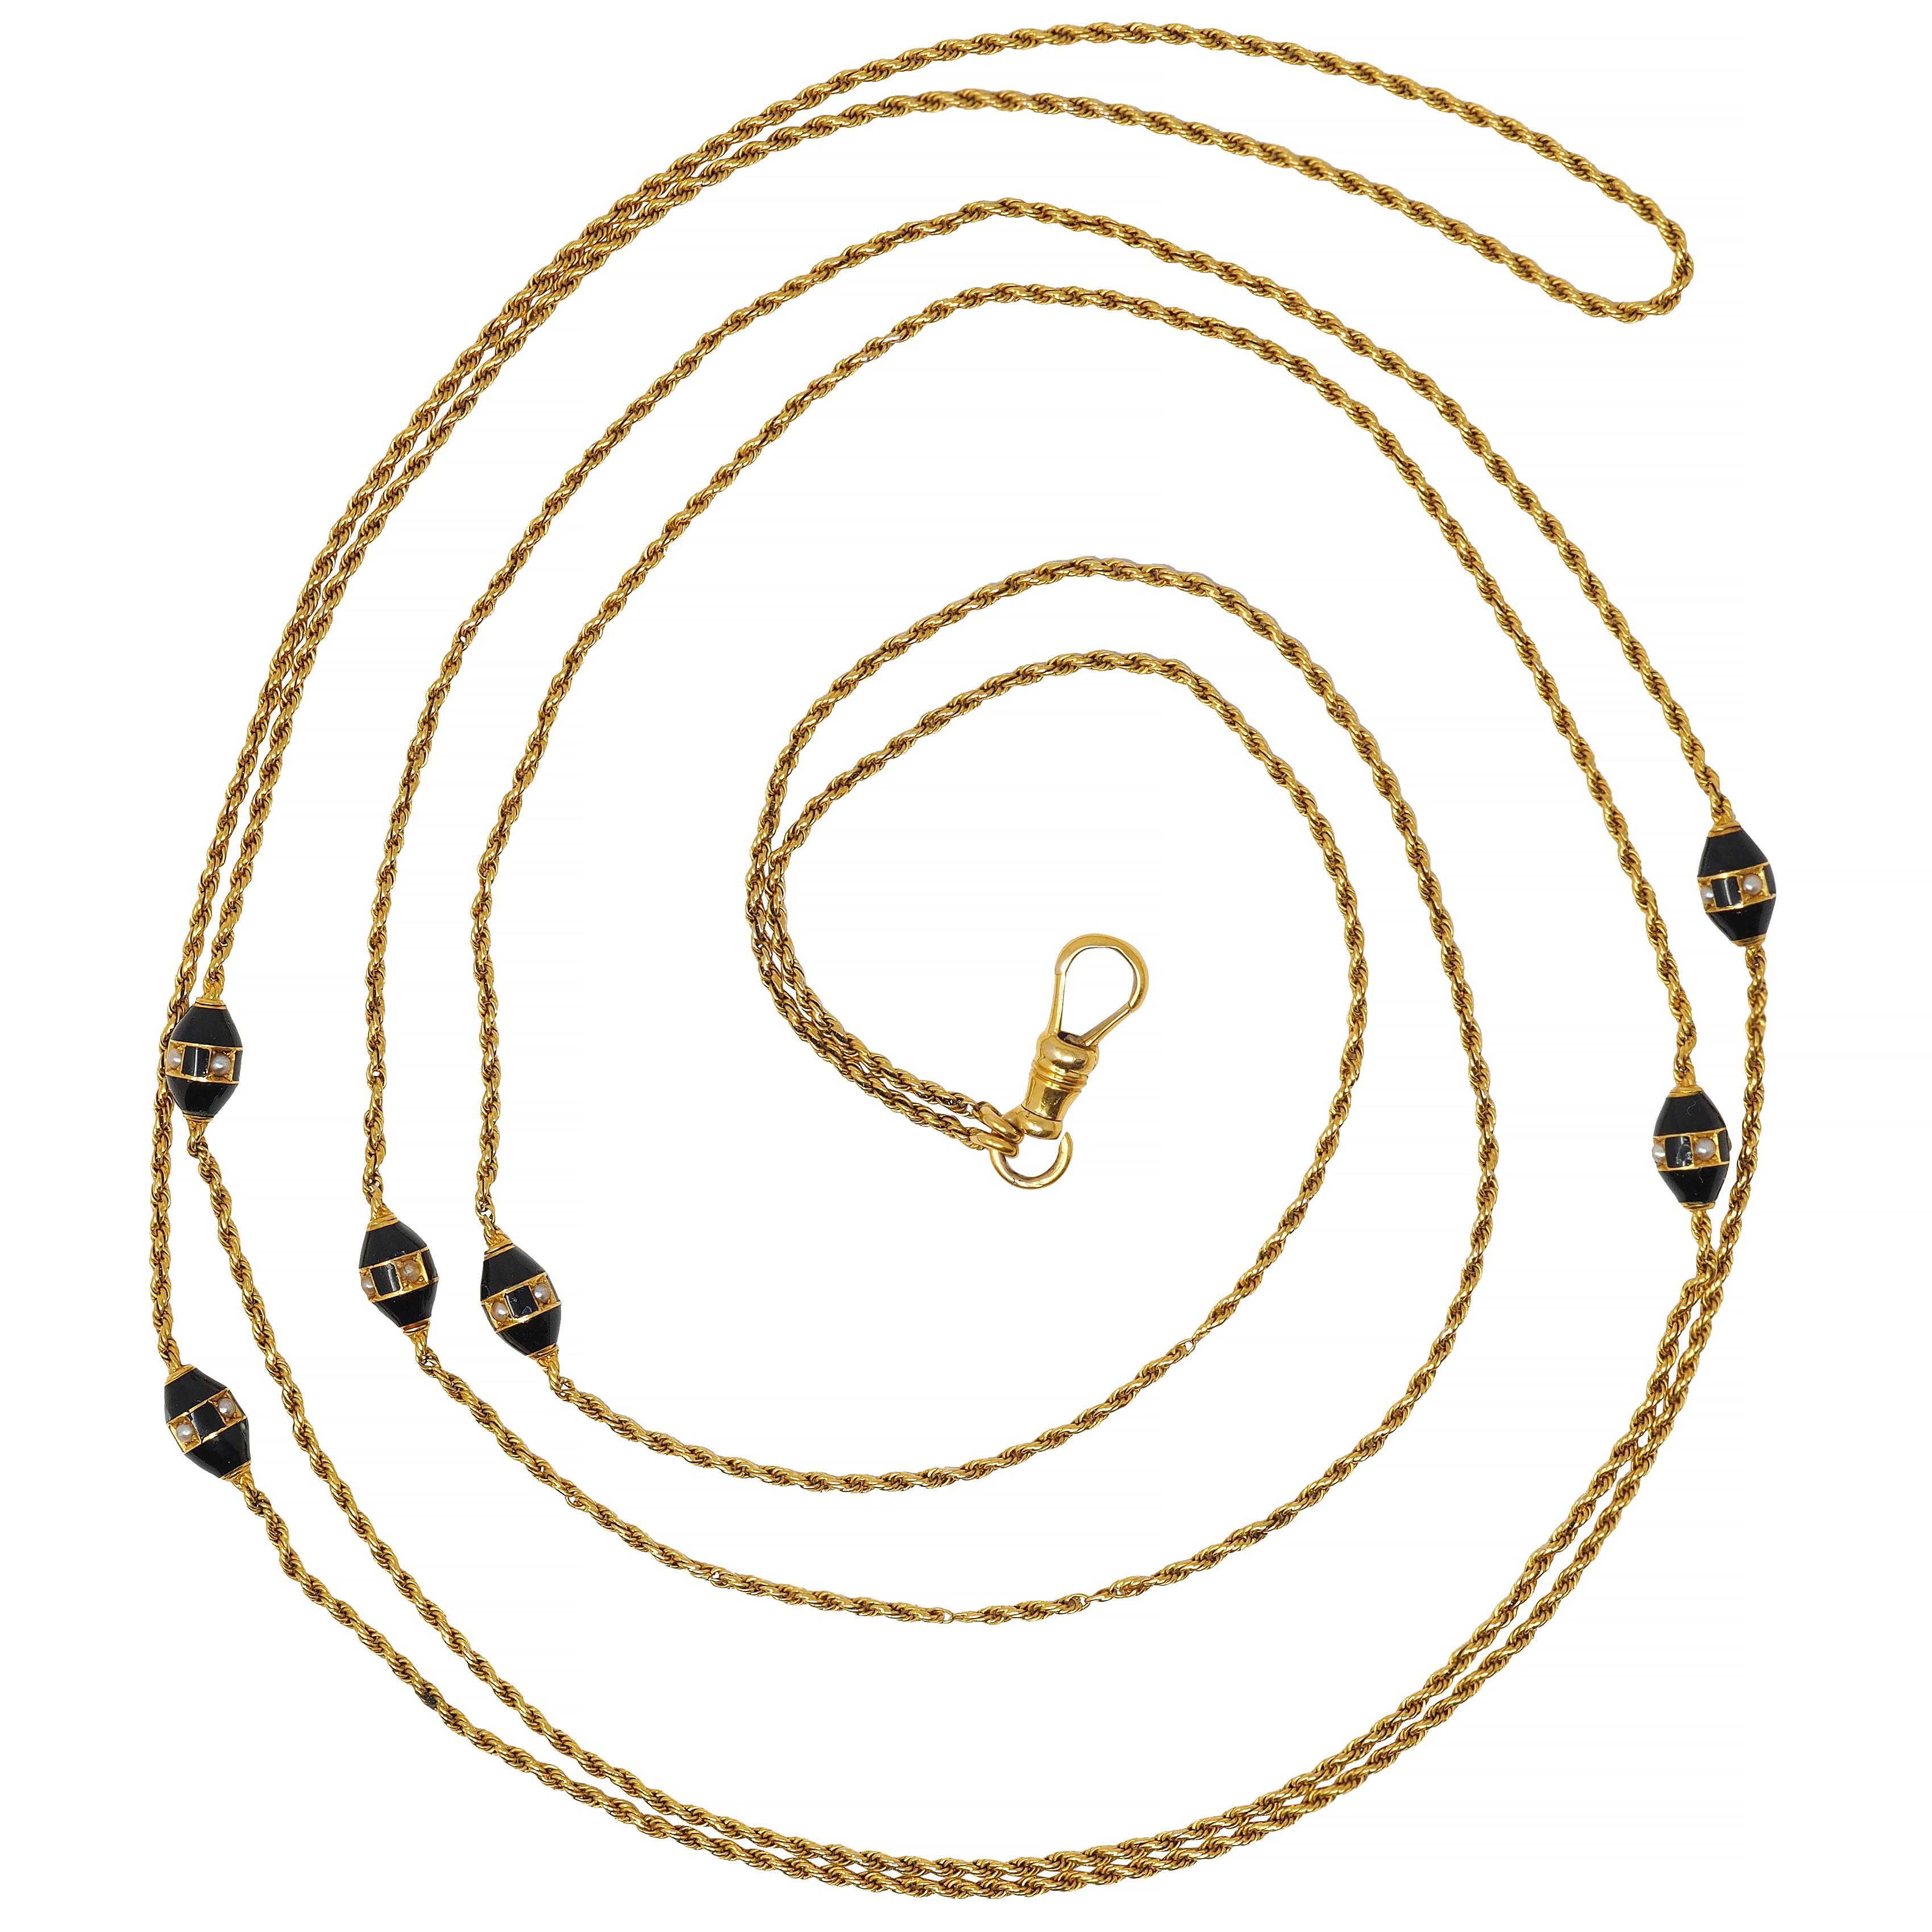 Designed as a 1.5 mm rope chain with six oval-shaped bead stations 
Glossed with opaque black enamel throughout 
Centering an alternating pattern of enamel and seed pearls
Pearls measure 1.5 mm round - bead set in gold squares 
Cream to gray in body